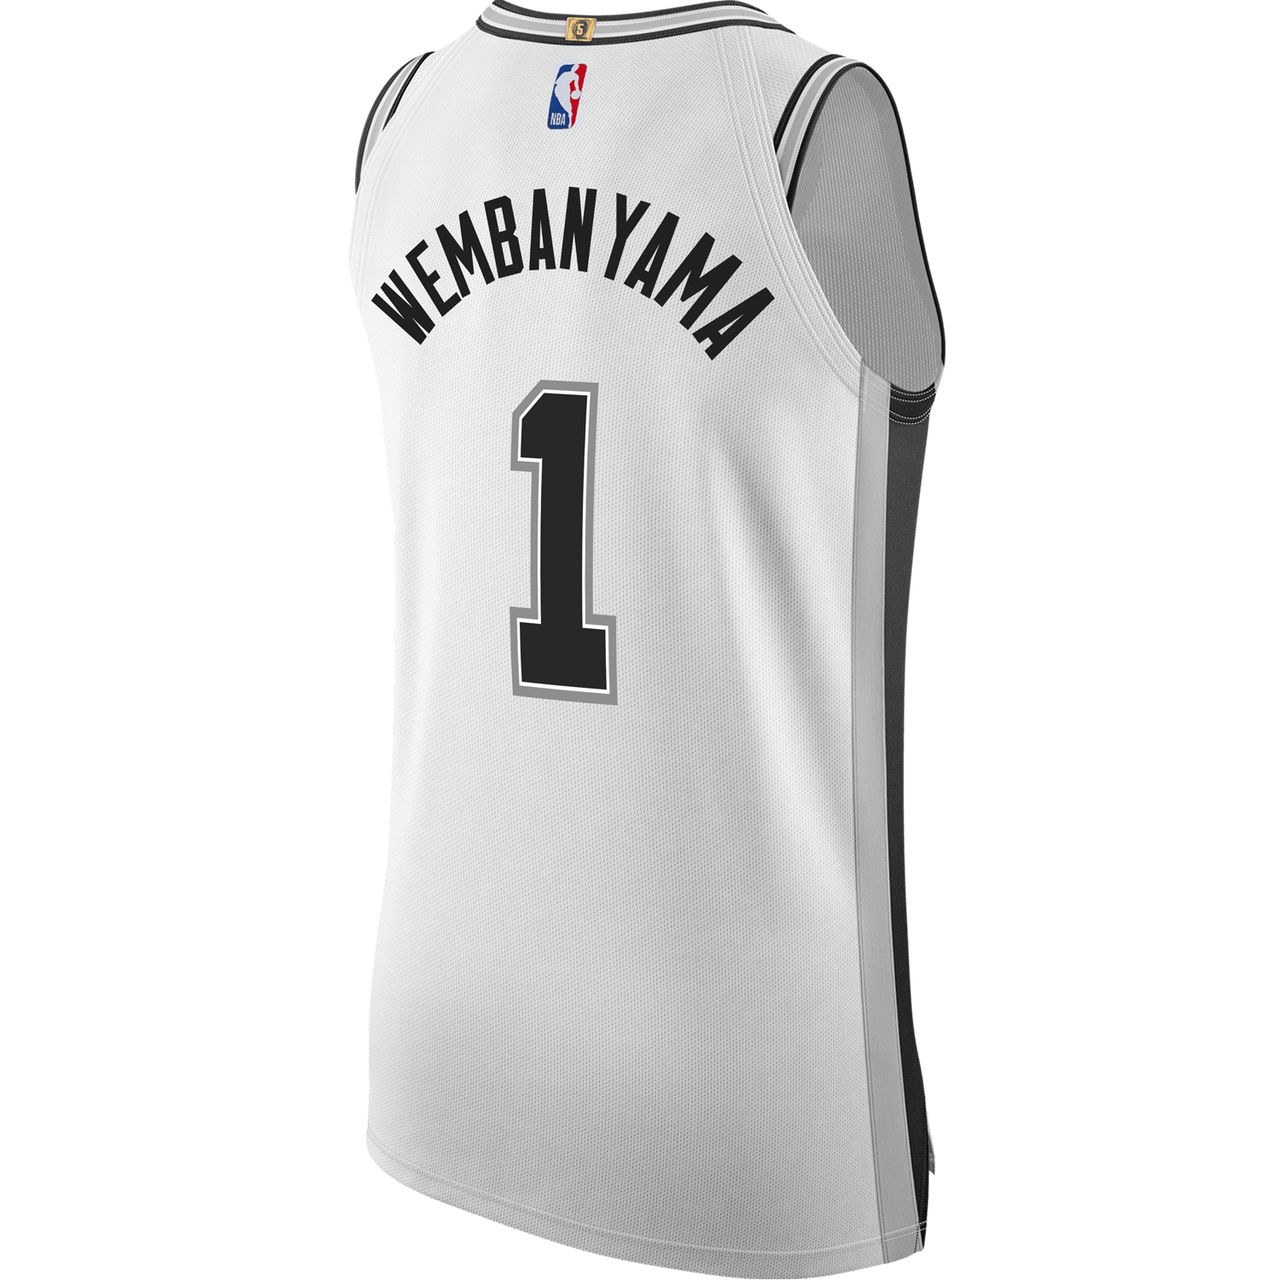 Victor Wembanyama Spurs Jersey: Where to Buy Online In-Stock, Price